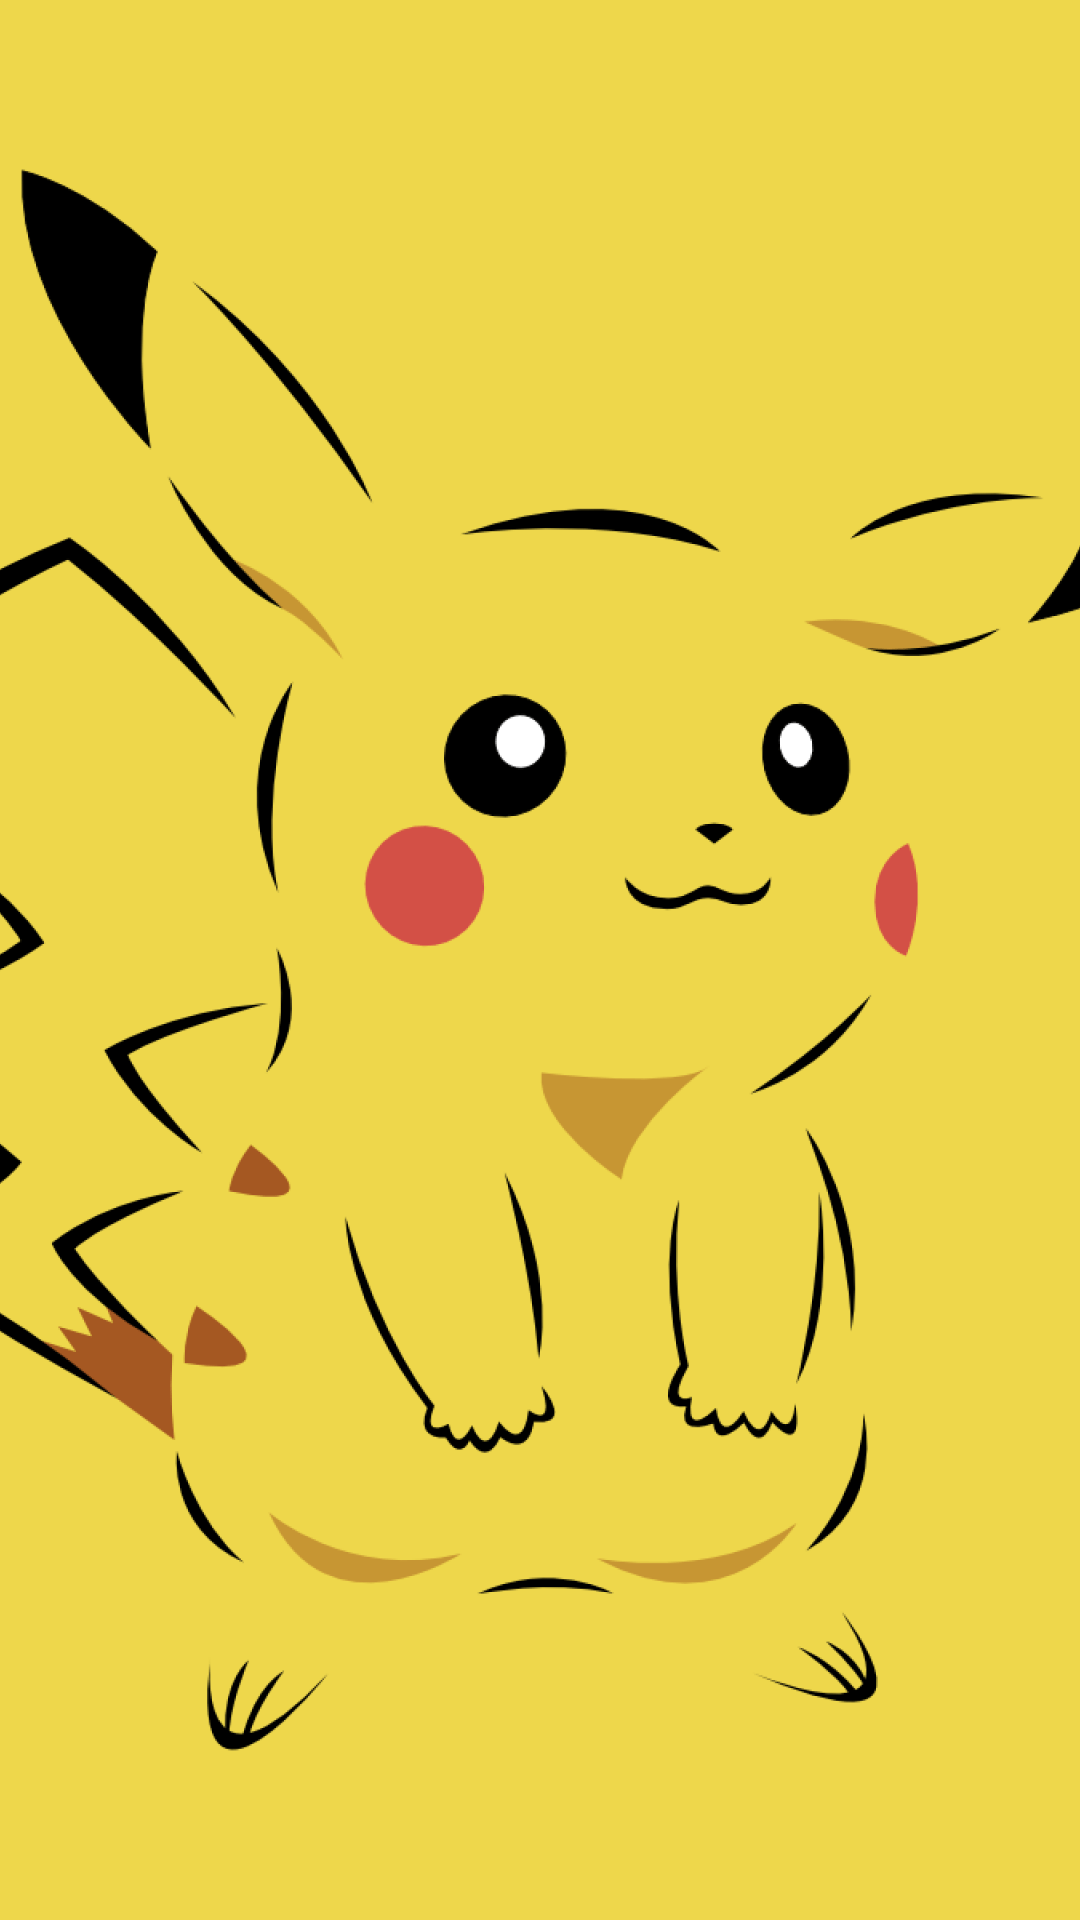 Pikachu HD Wallpaper for iPhone 6 Plus. Wallpaper.Picture. Best